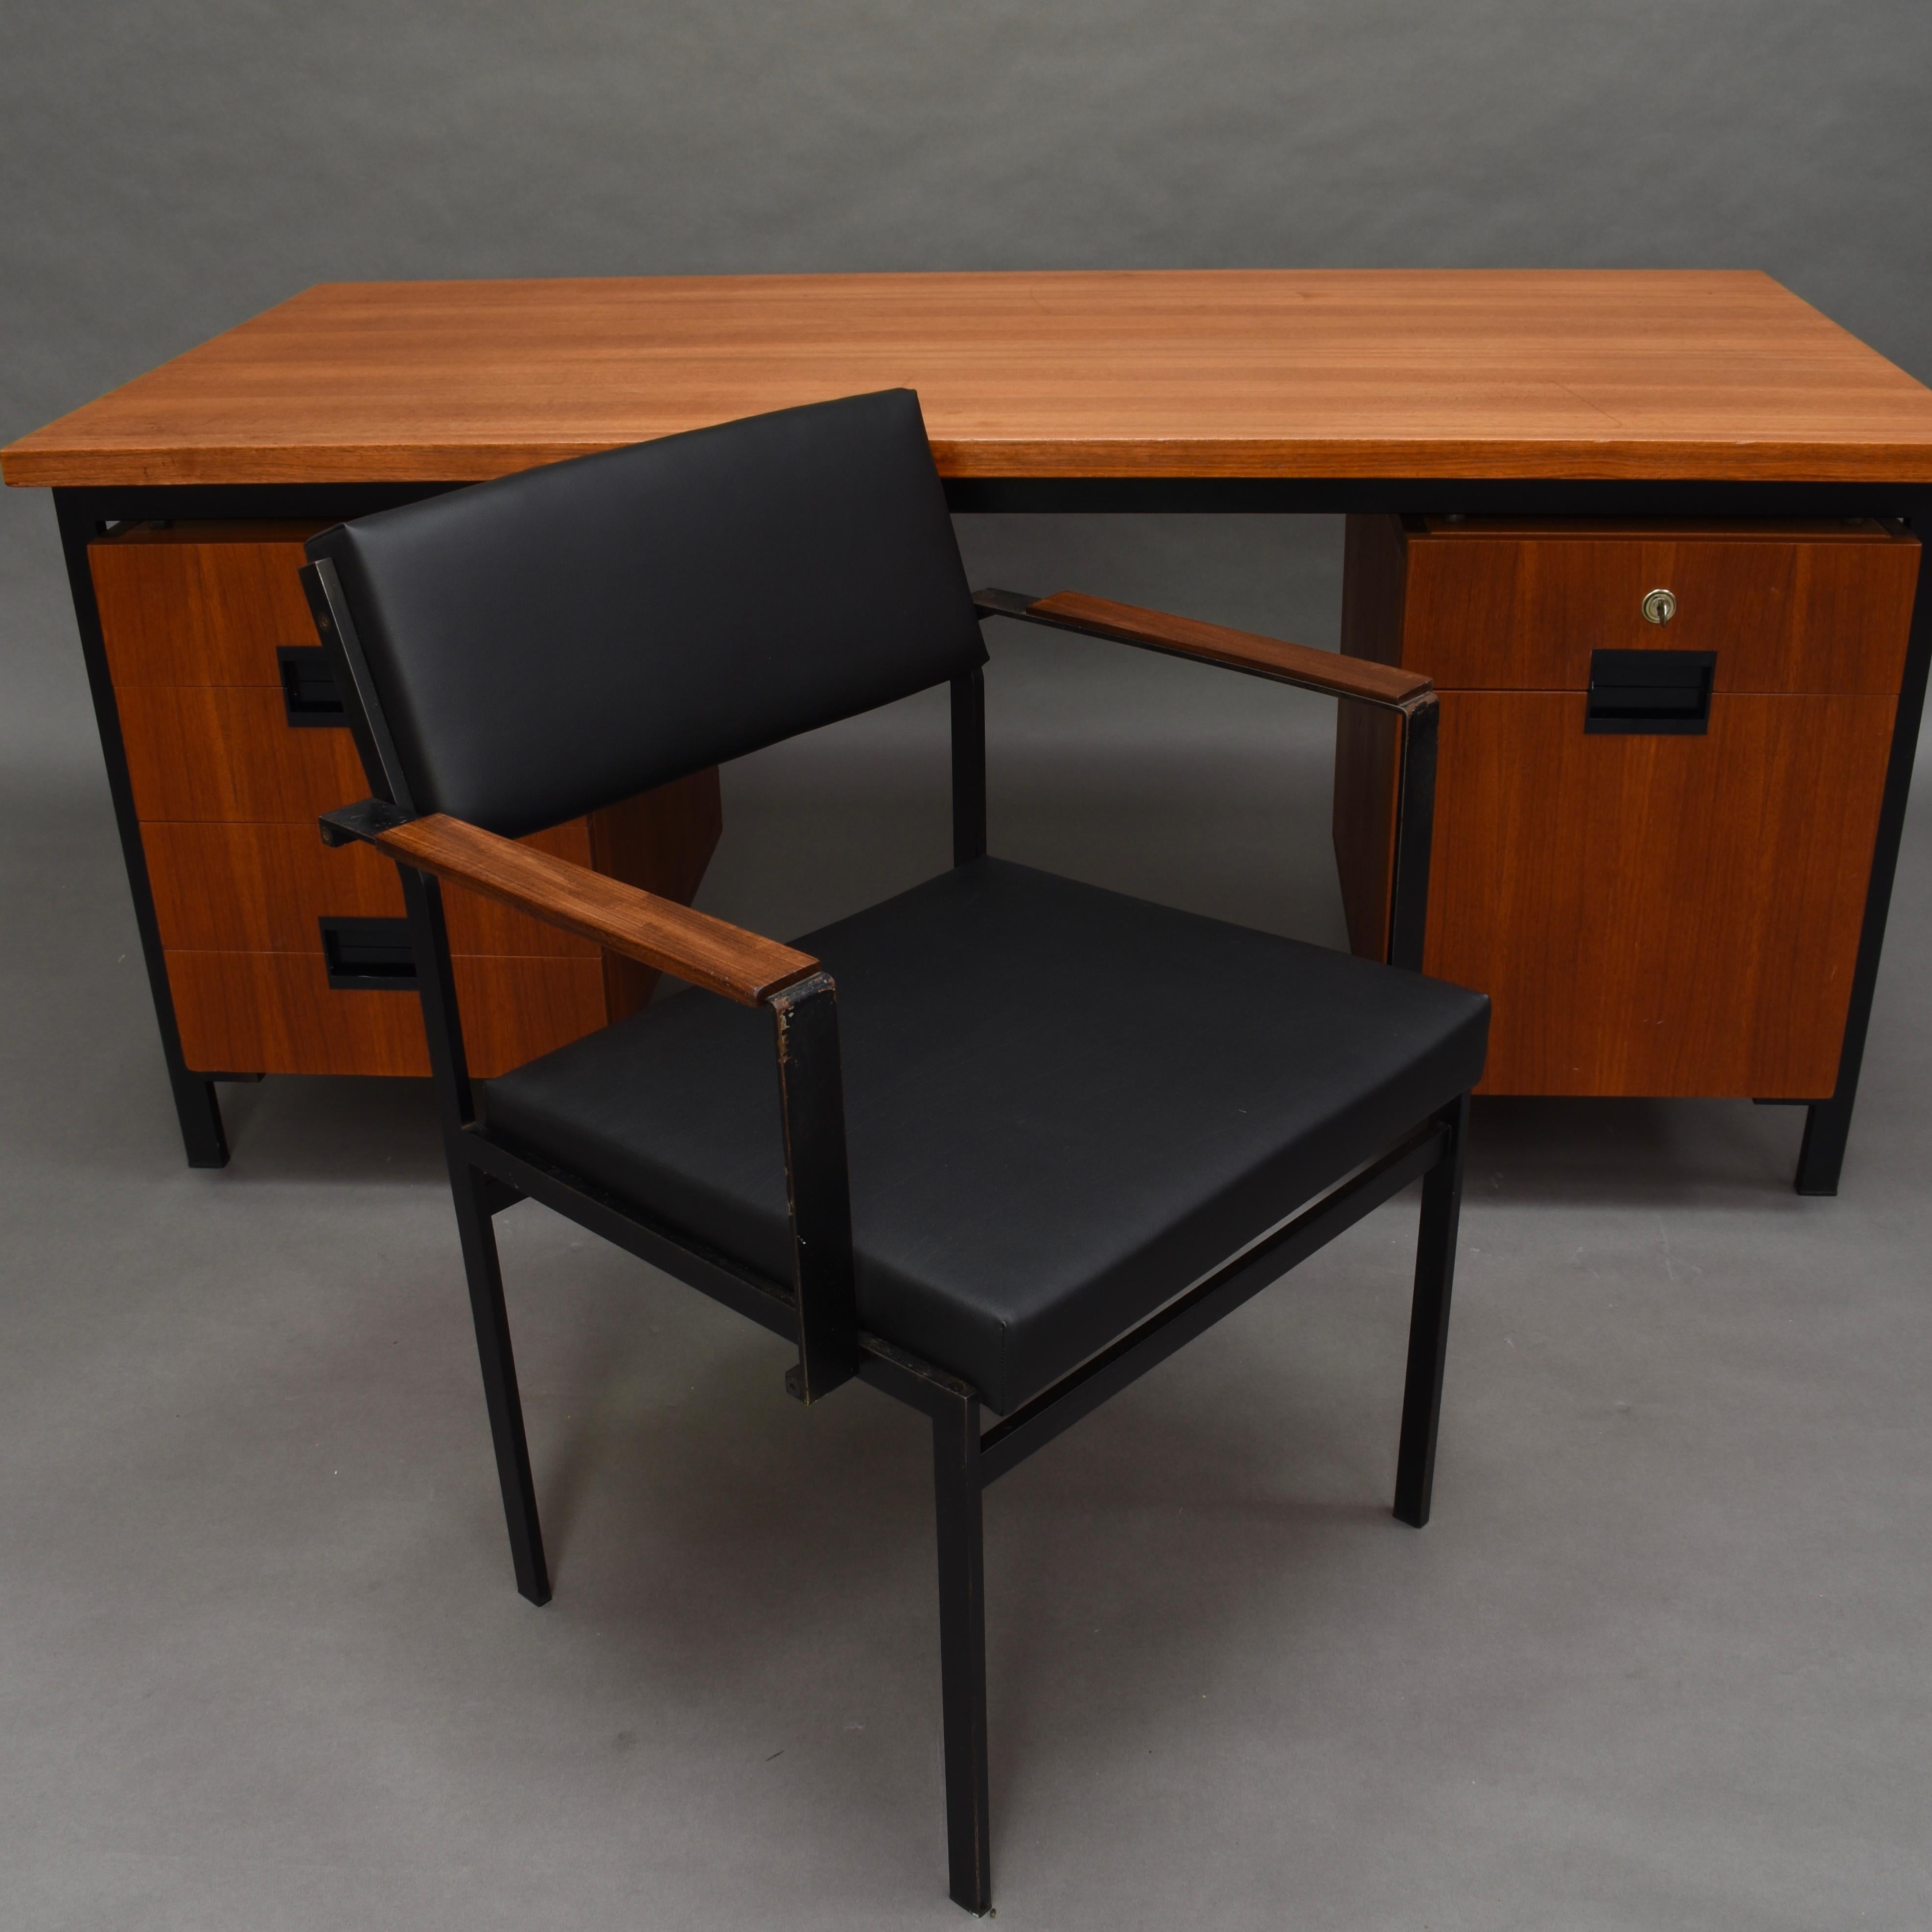 Mid-20th Century Cees Braakman for Pastoe Model EU02 Japanese Series Desk and Chair in Teak, 1950 For Sale